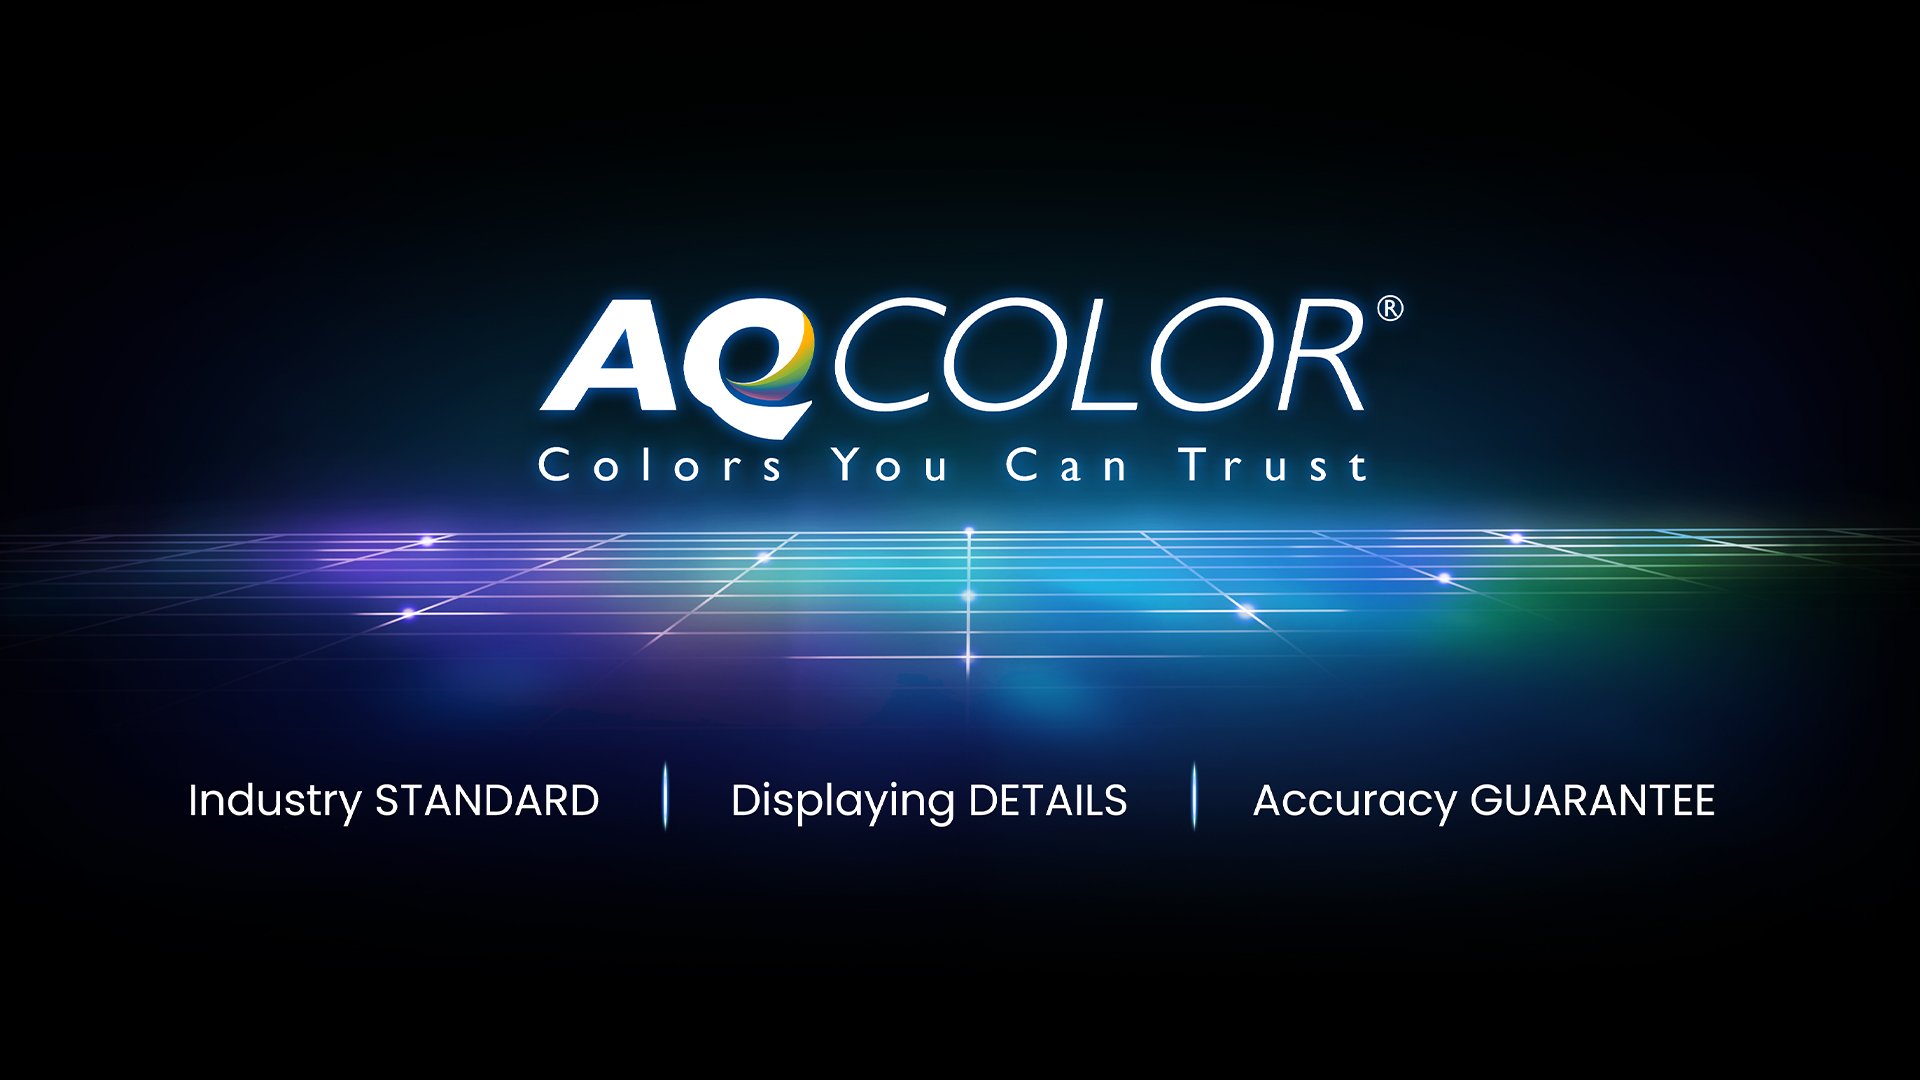 BenQ empowers creative professionals with AQCOLOR Technology to help inspiration come along and come alive.